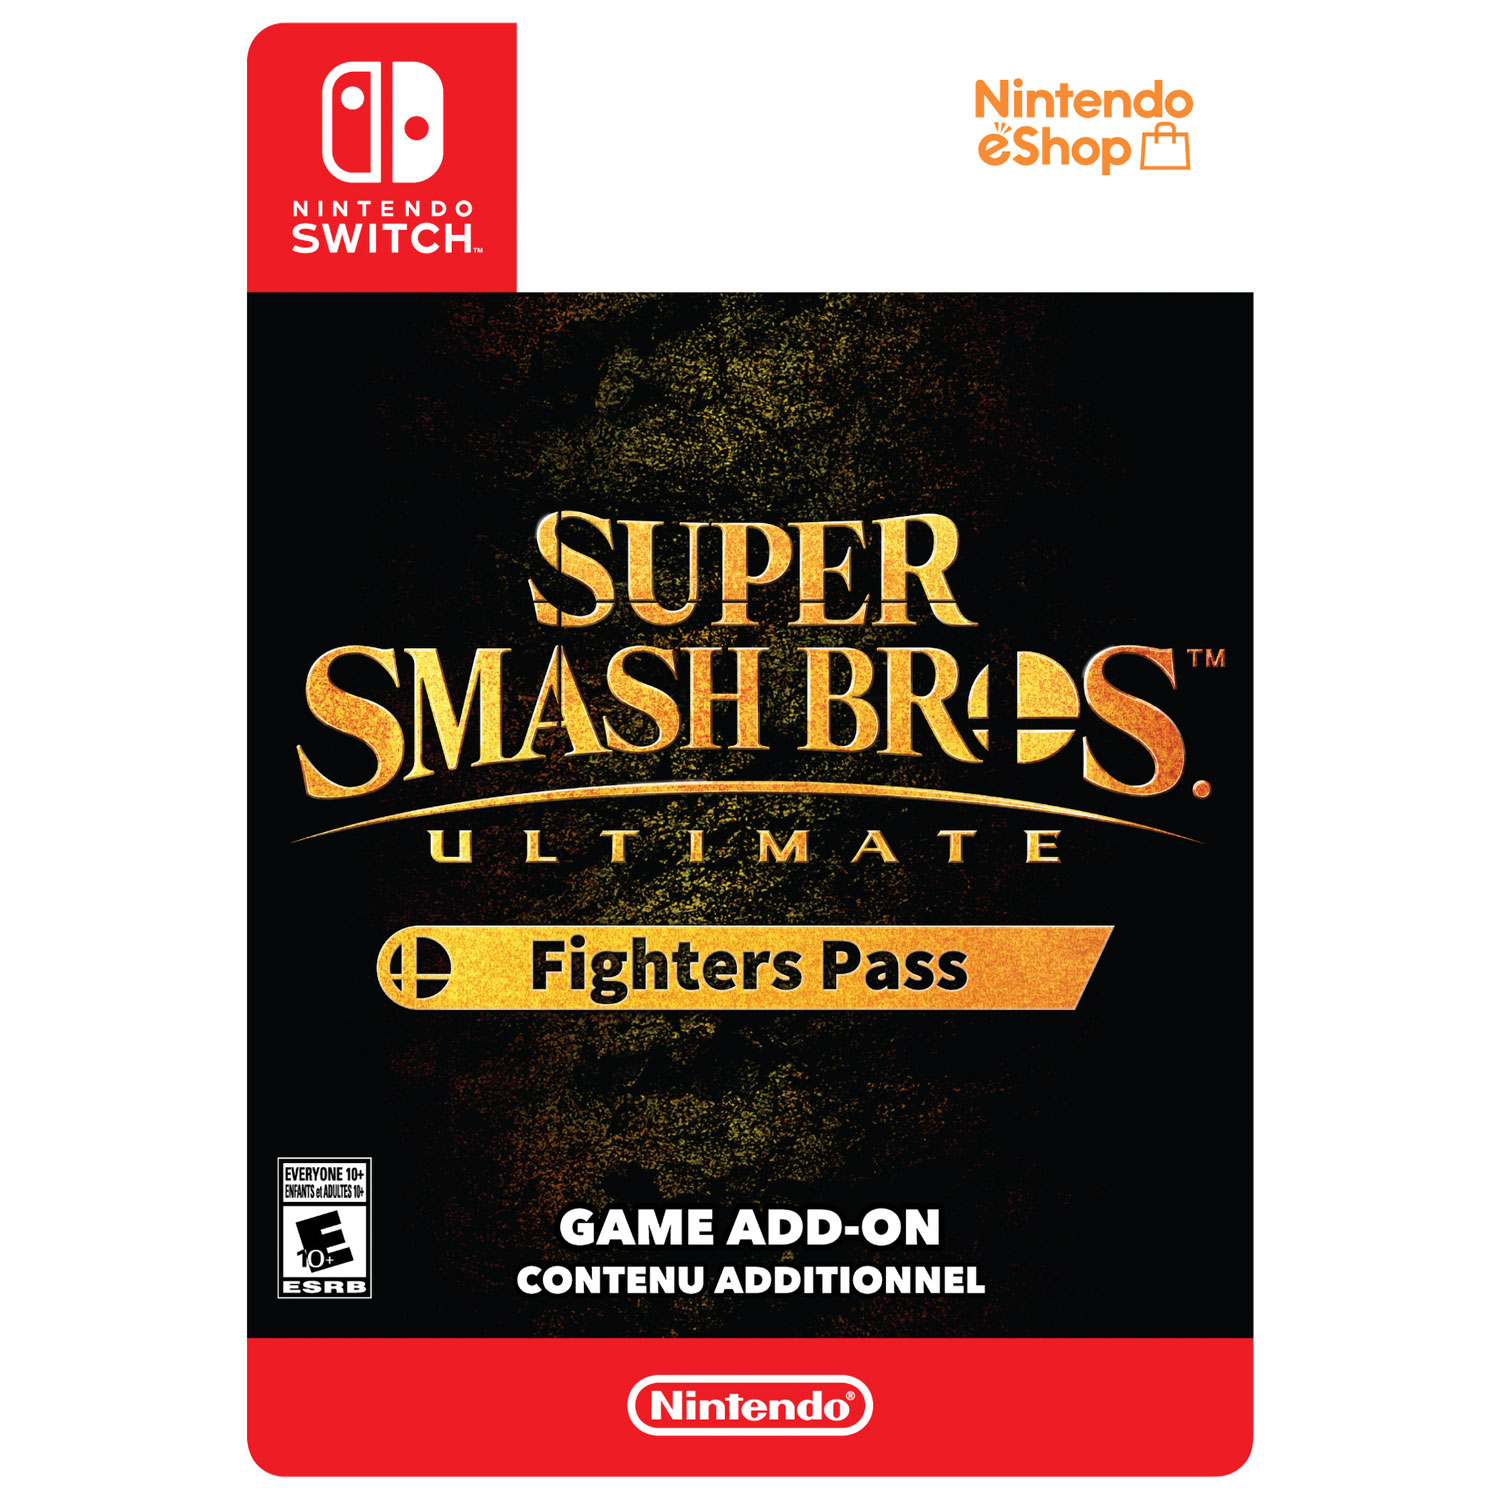 Super Smash Bros Ultimate Fighters Pass (Switch) - Digital Download